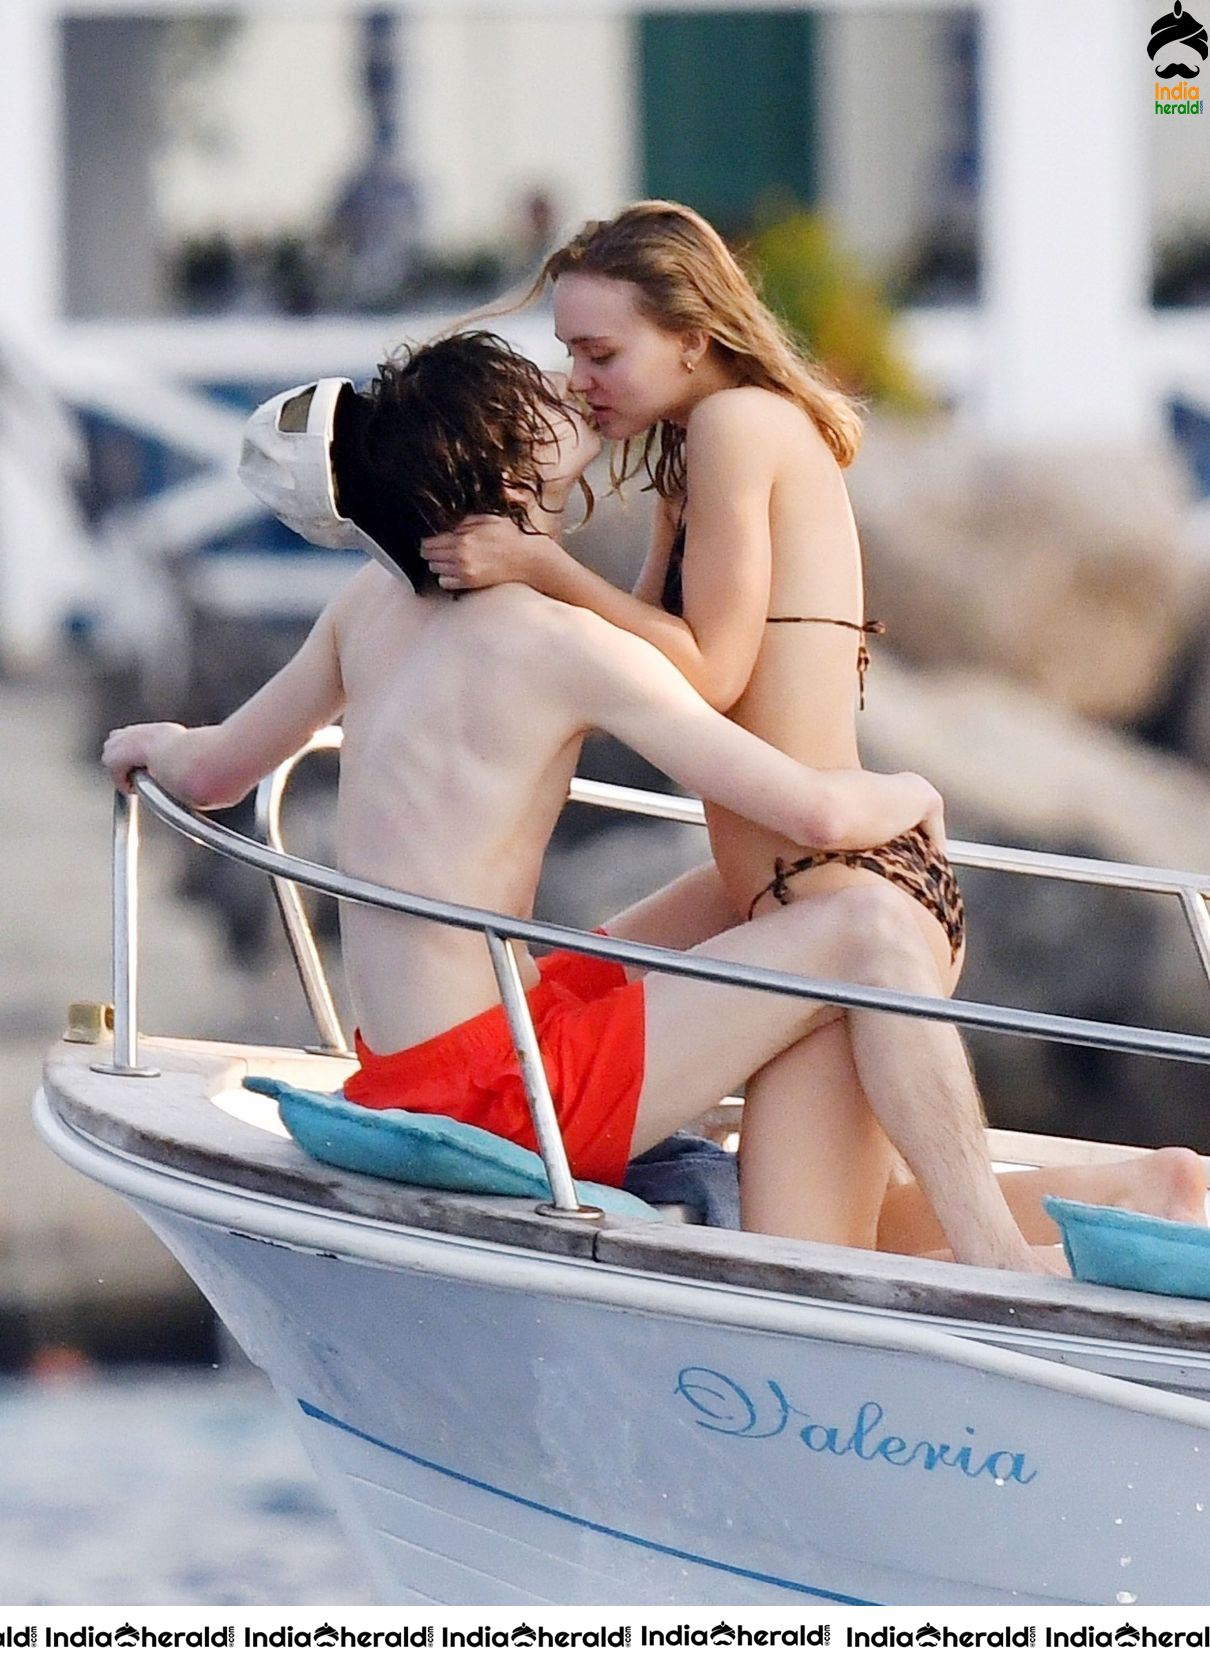 Johnny Depp Daughter Lily Rose Depp Caught in Bikini With her Boyfriend in a Boat Set 2